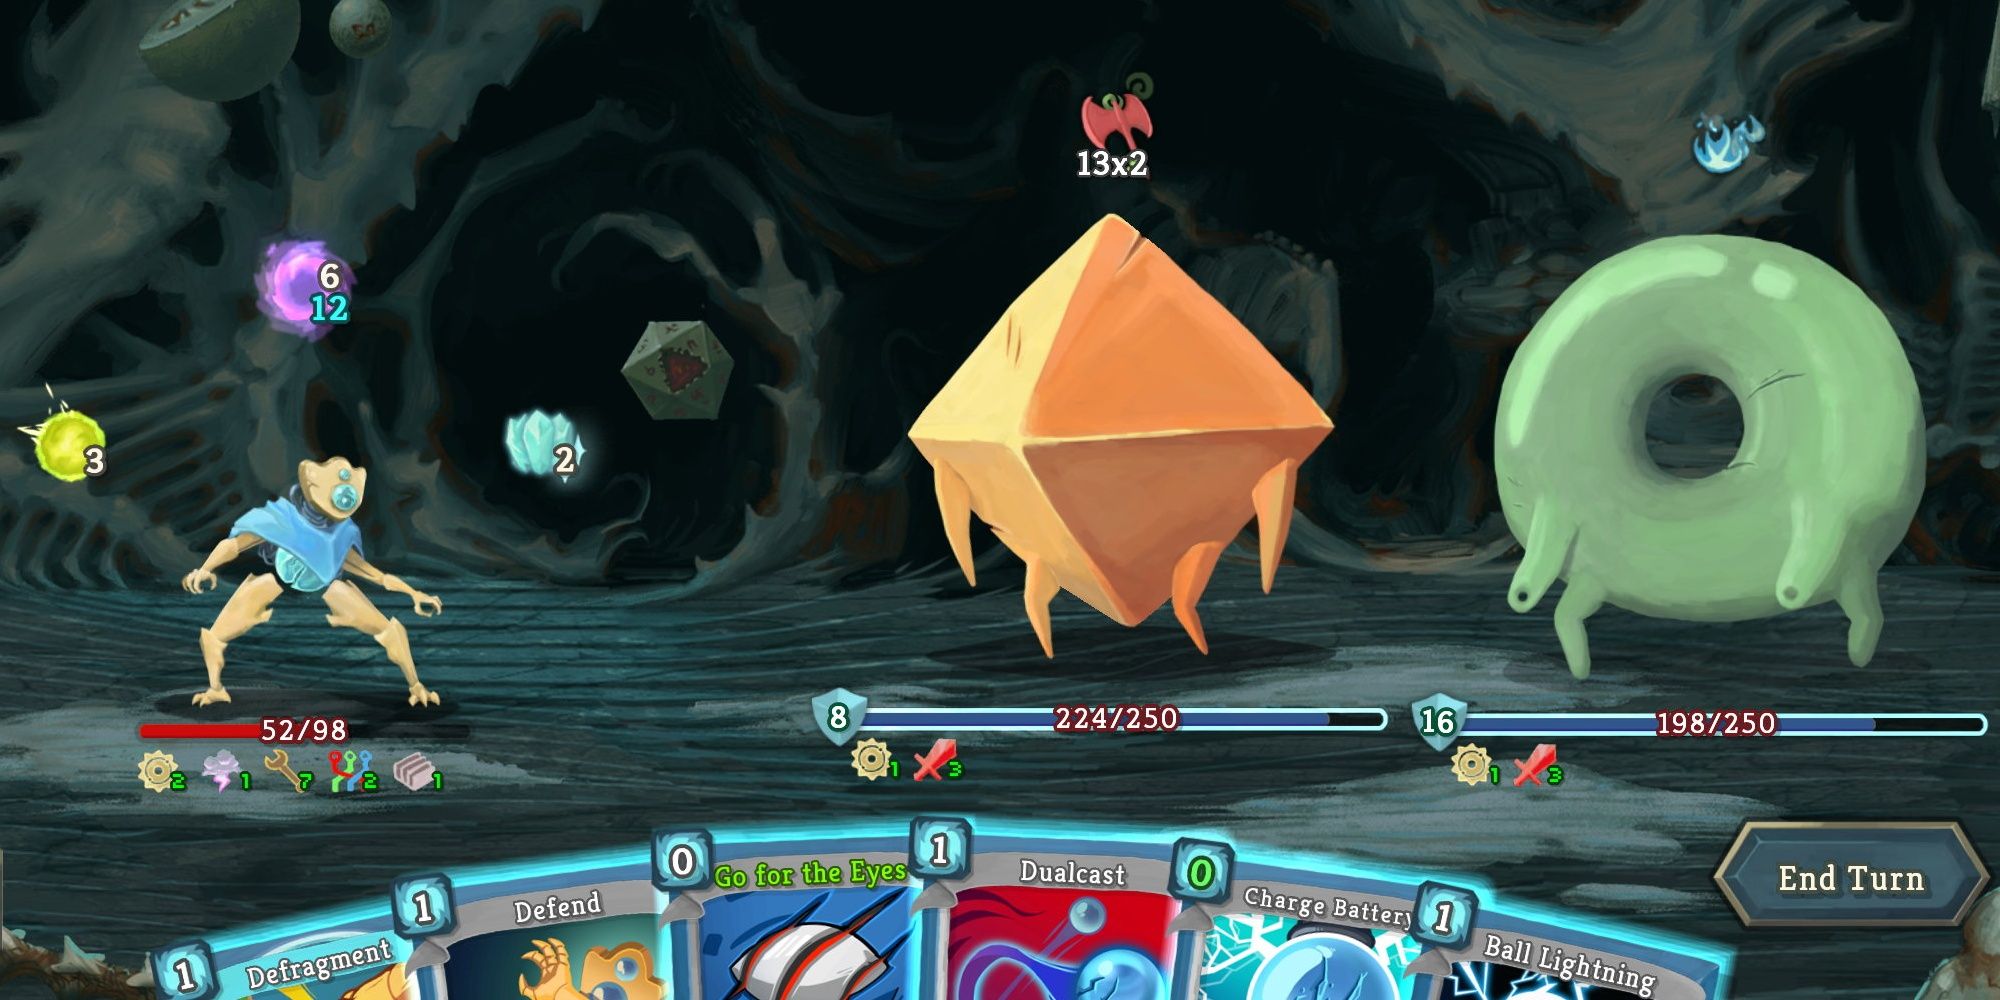 Battle between shapes and Defect in Slay the Spire